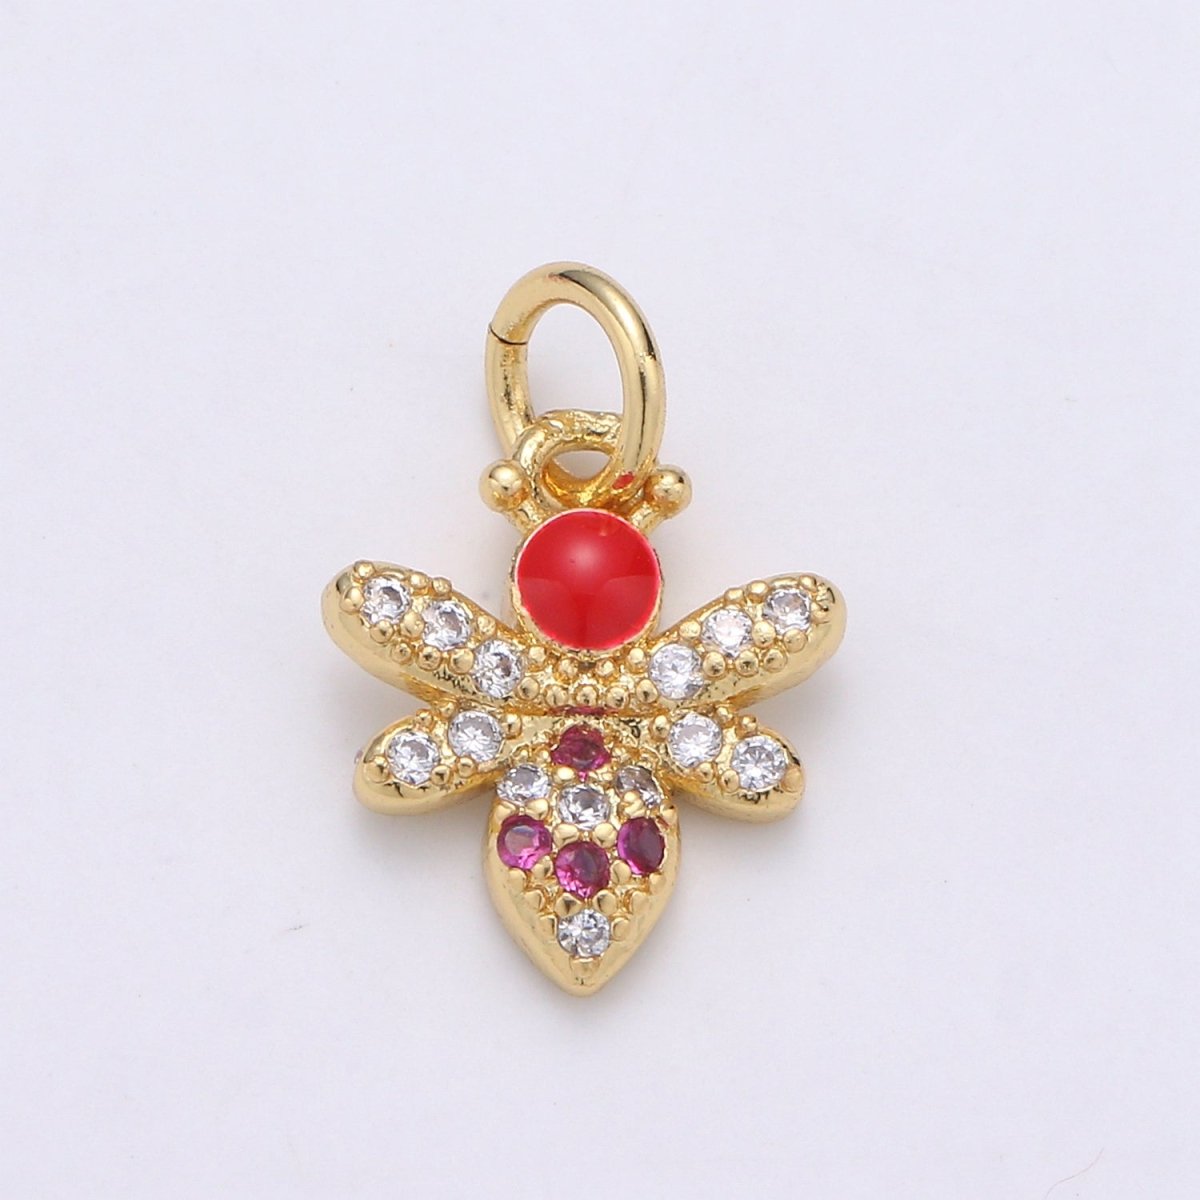 24K Gold Filled Red Bees Flies Charm D-934 - DLUXCA